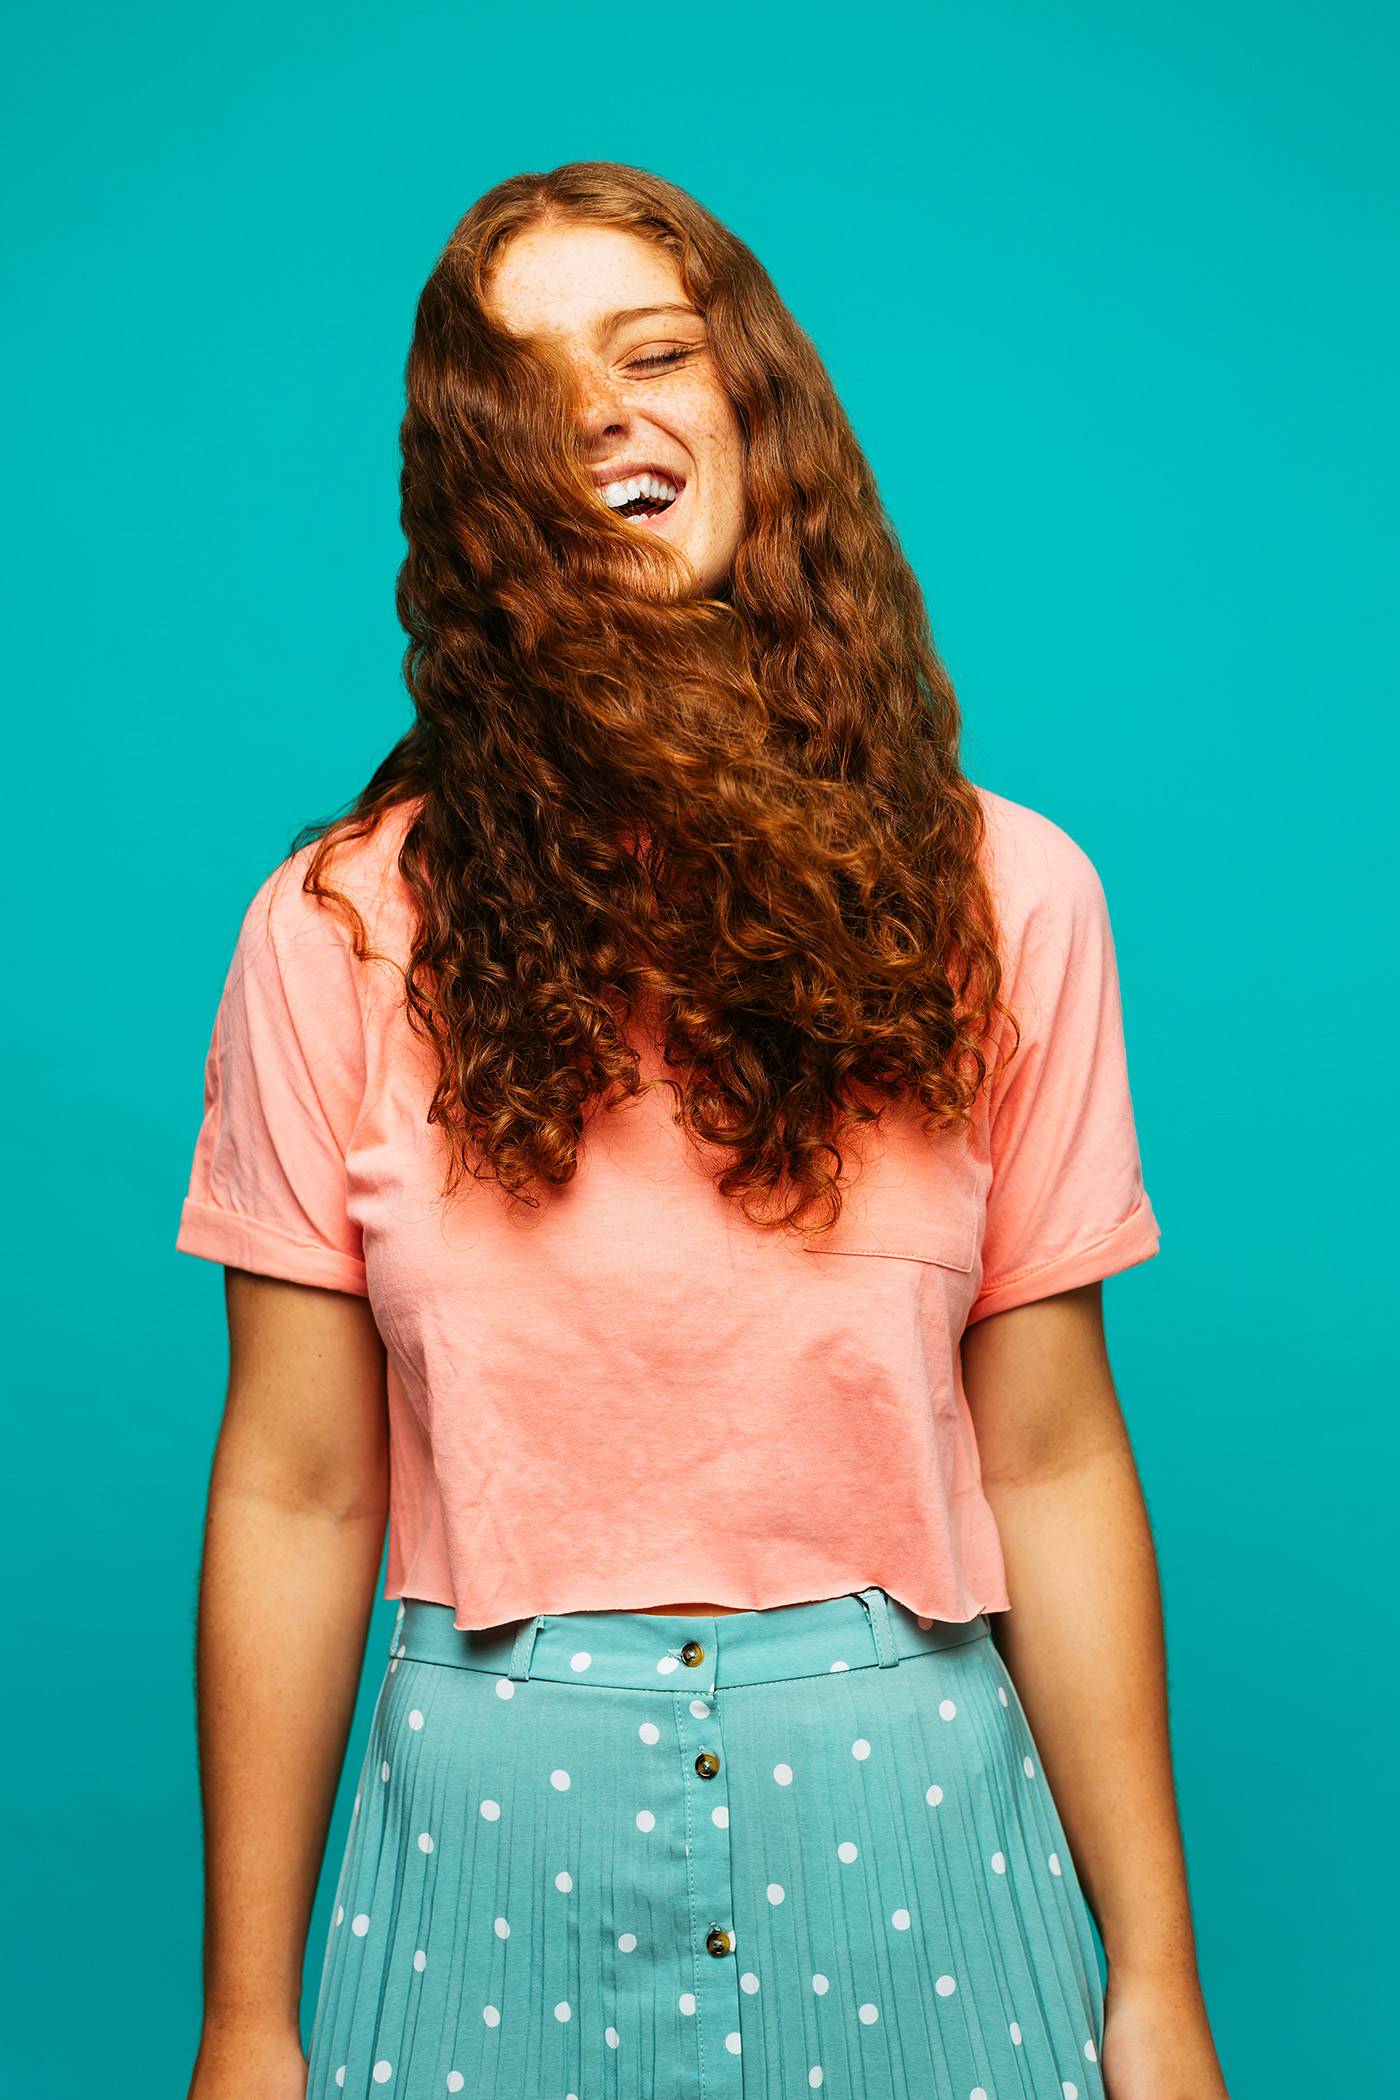 Joyful ginger teen girl with long curly hair covering face wearing pink blouse and blue polka dot plisse skirt laughing out loud while standing against turquoise background